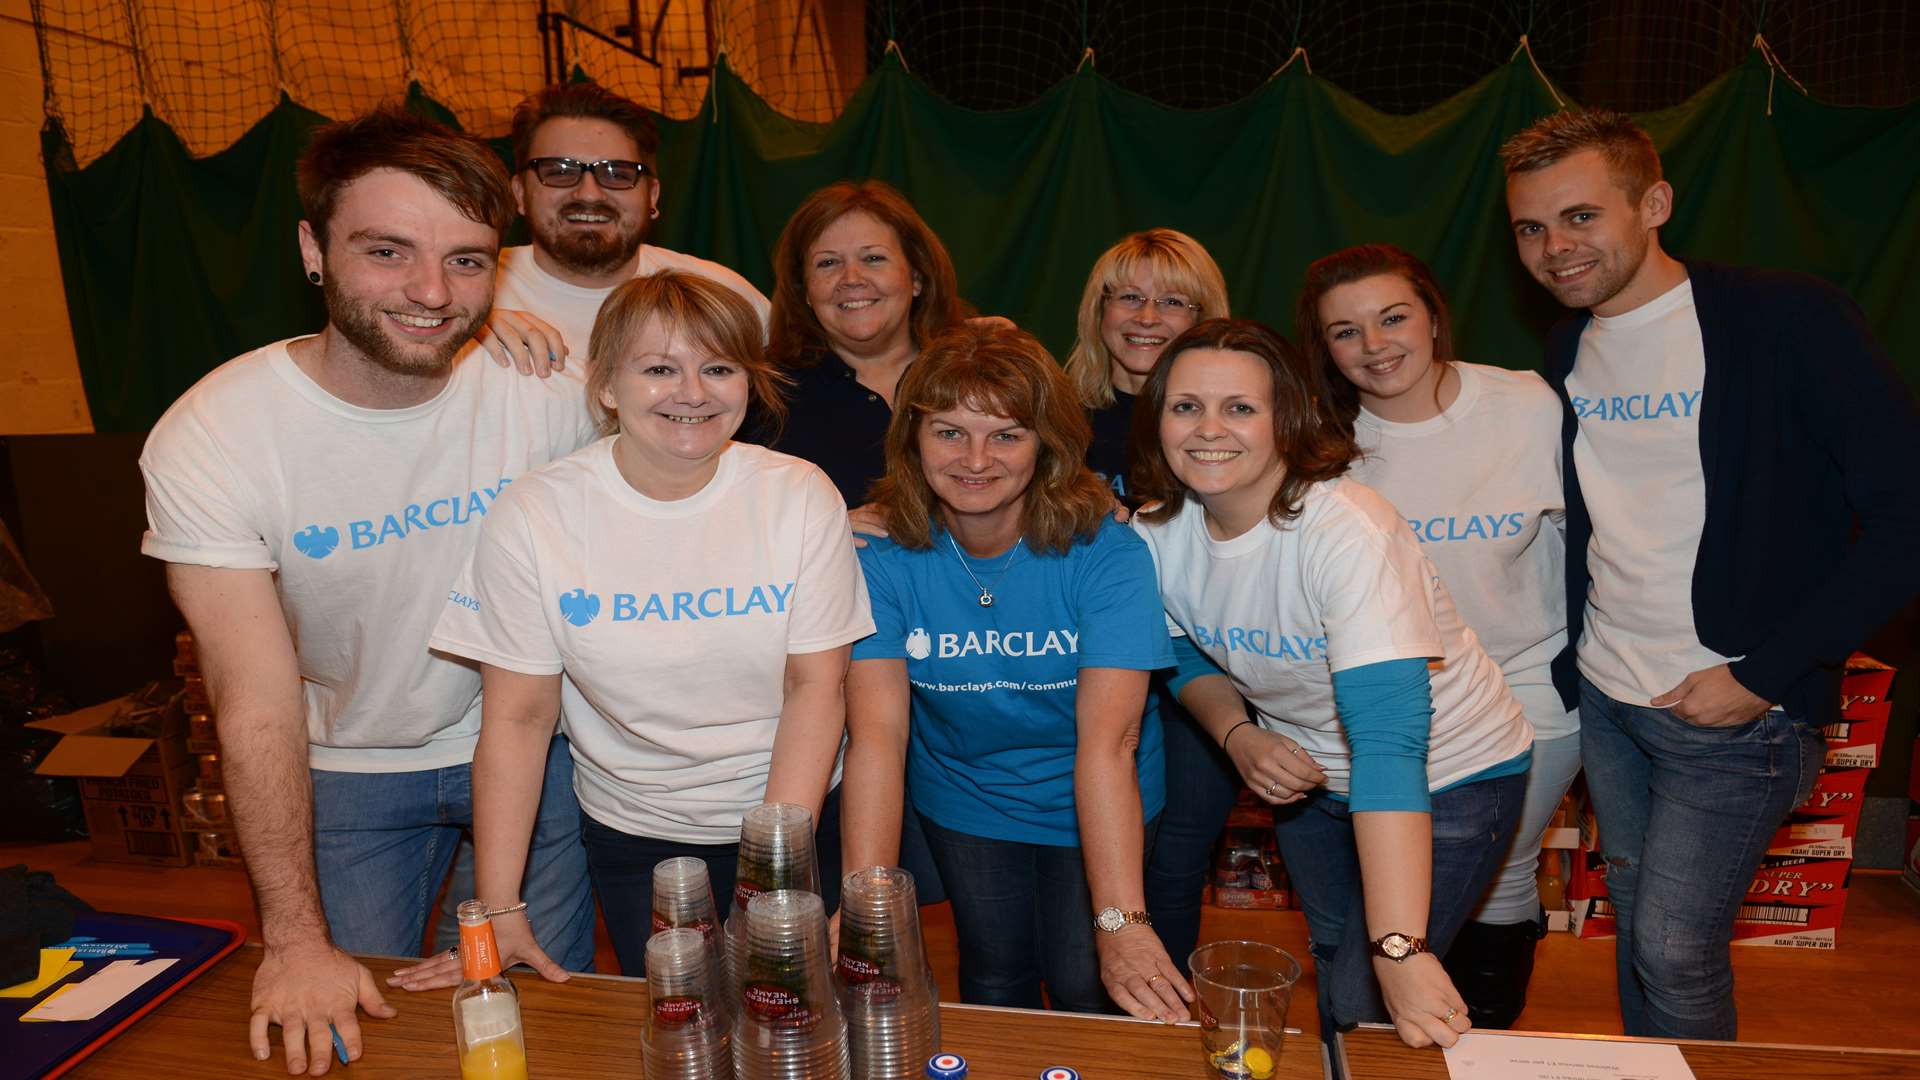 Barclays Bank manned the Spitfire charity bar stocked by Shepherd Neame at the Ashford Big Charity Quiz 2015.